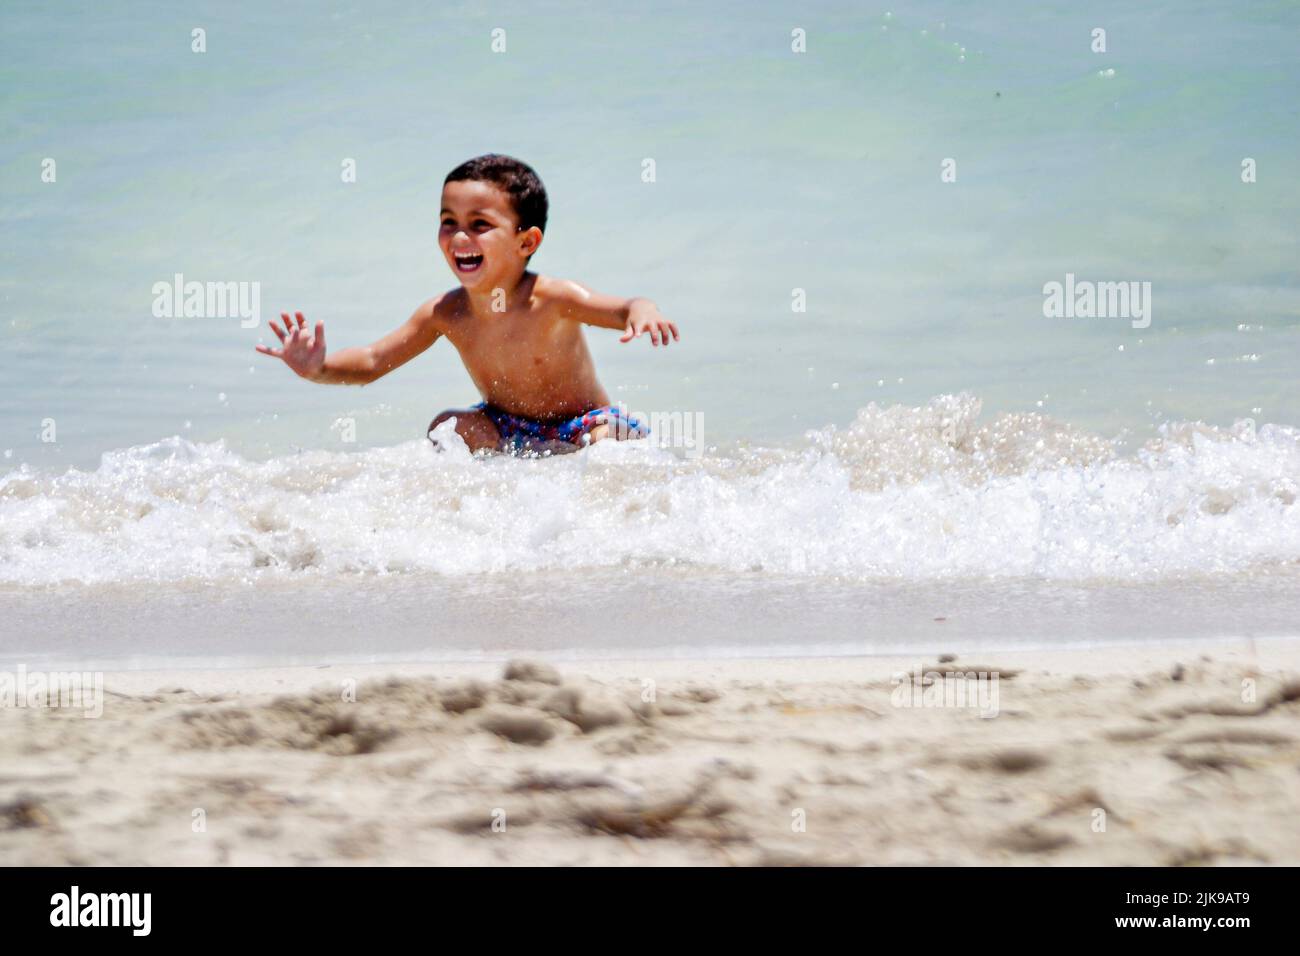 Miami Beach Florida,Atlantic Ocean public Shore,seashore,Hispanic male,boy boys,kid child youngster youngsters youth youths playing having fun in surf Stock Photo